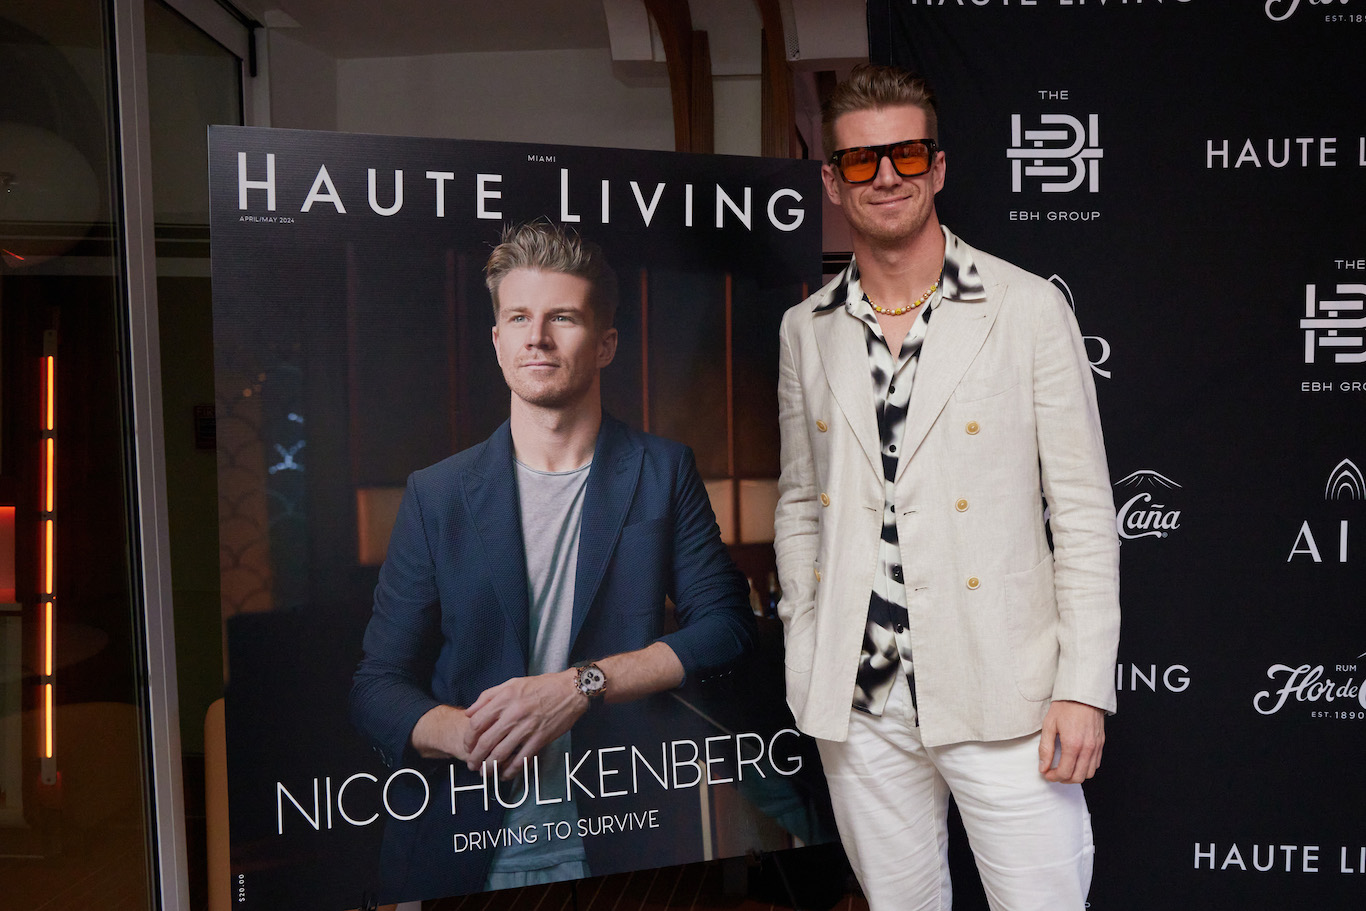 Haute Living Celebrates F1 Driver Nico Hulkenberg With Flor de Caña Rum And The EBH Group In Miami